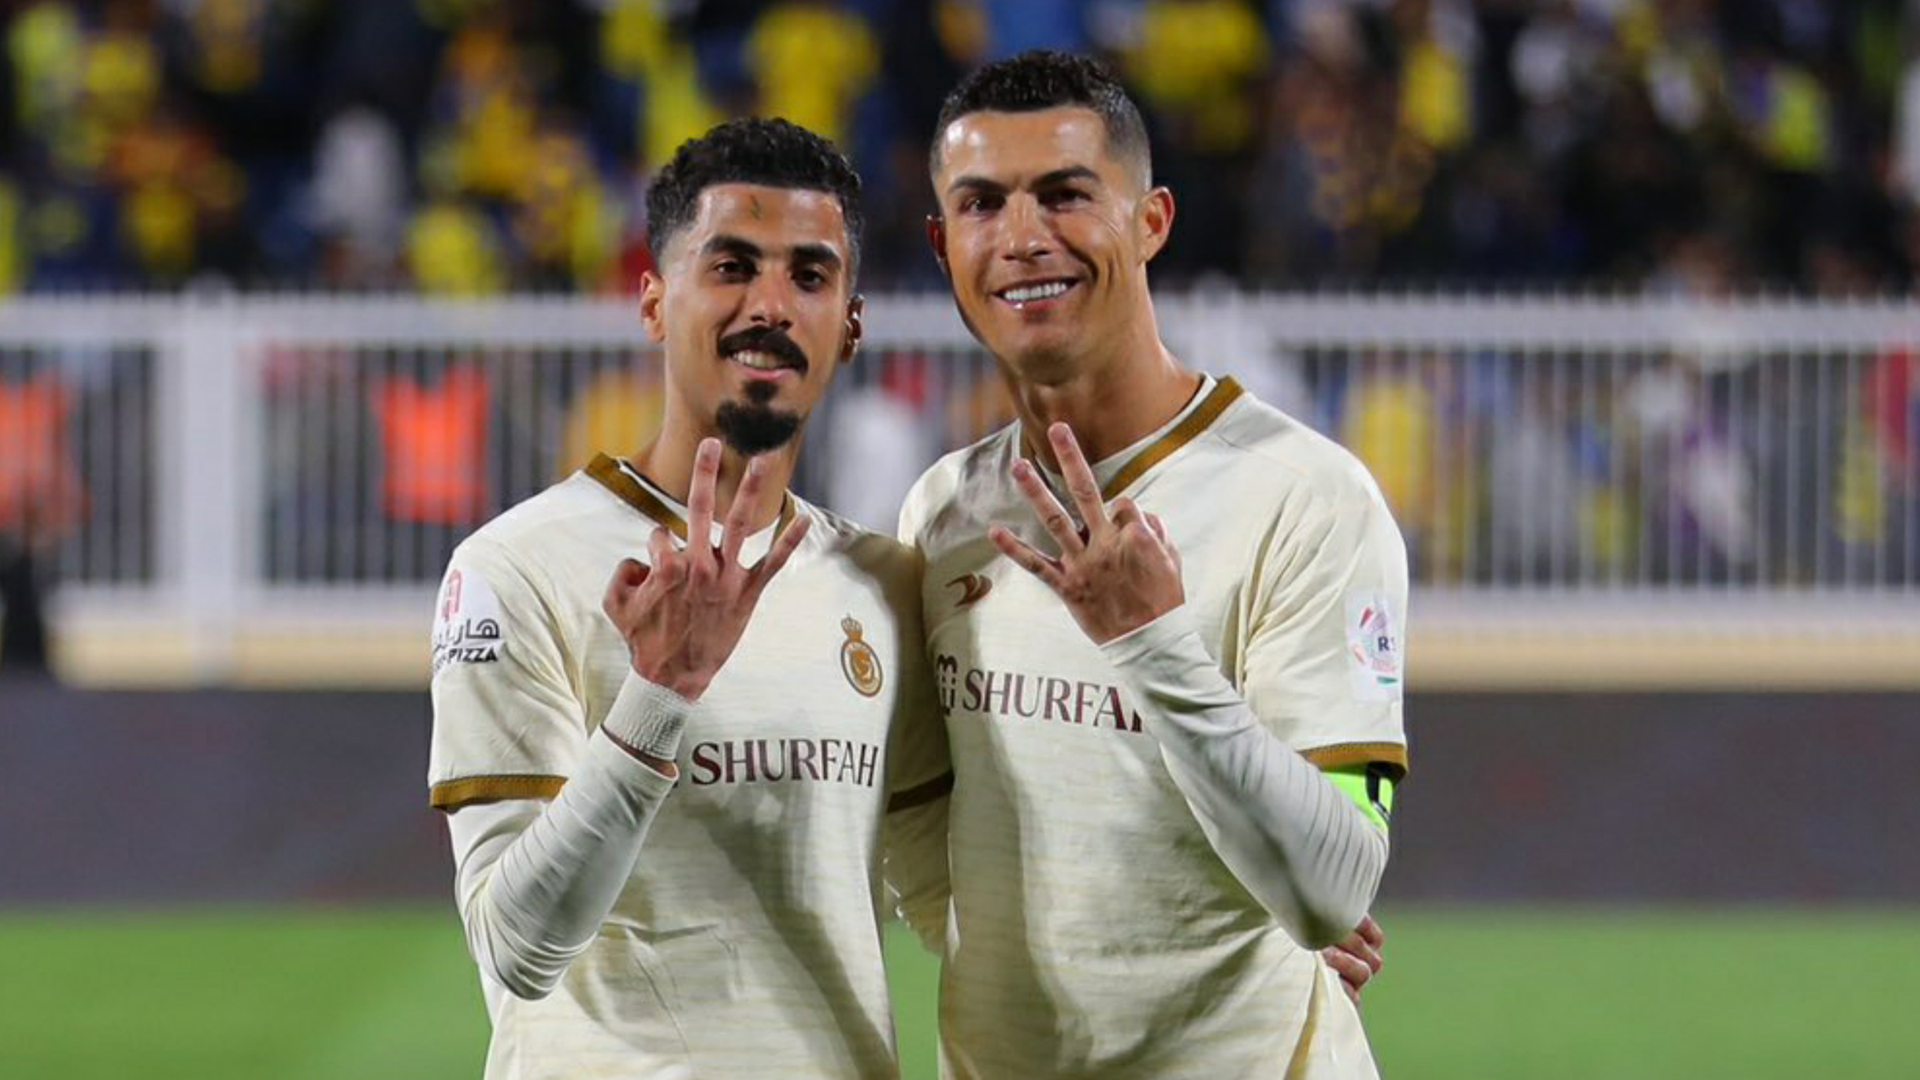 'Special night!' Cristiano Ronaldo reacts after scoring second hat